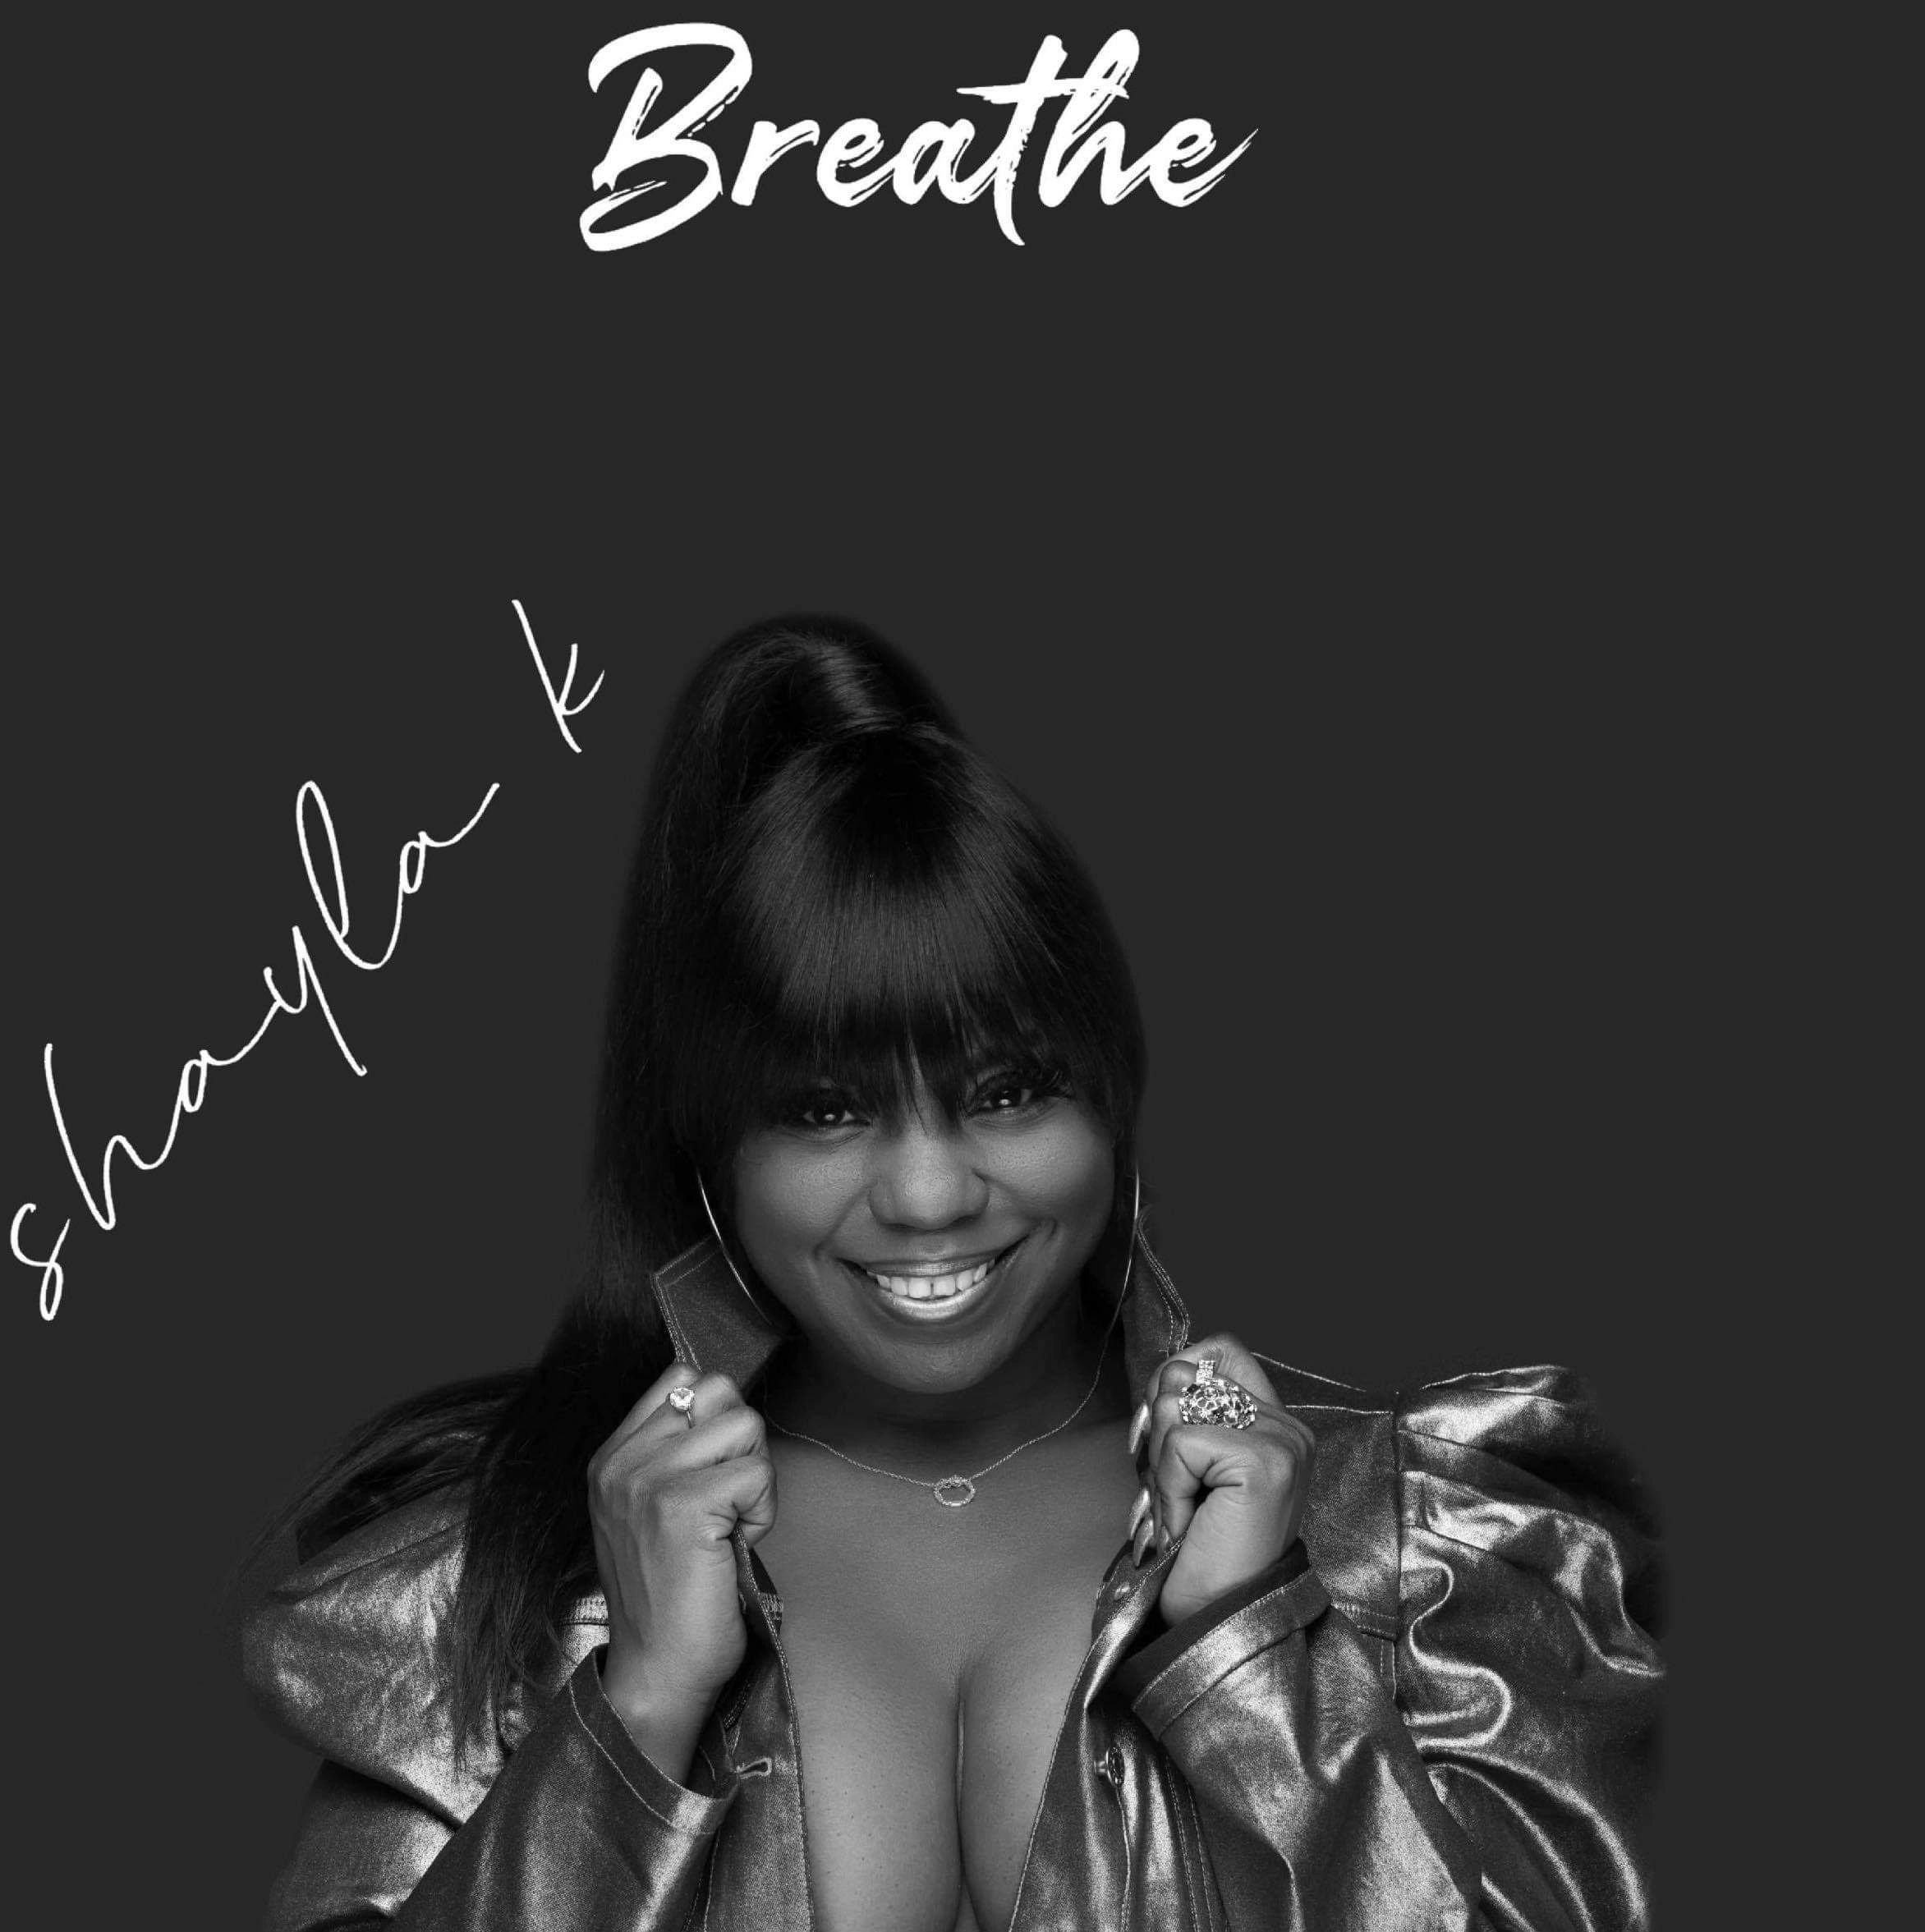 "Breathe" Being Released 2/21/2020